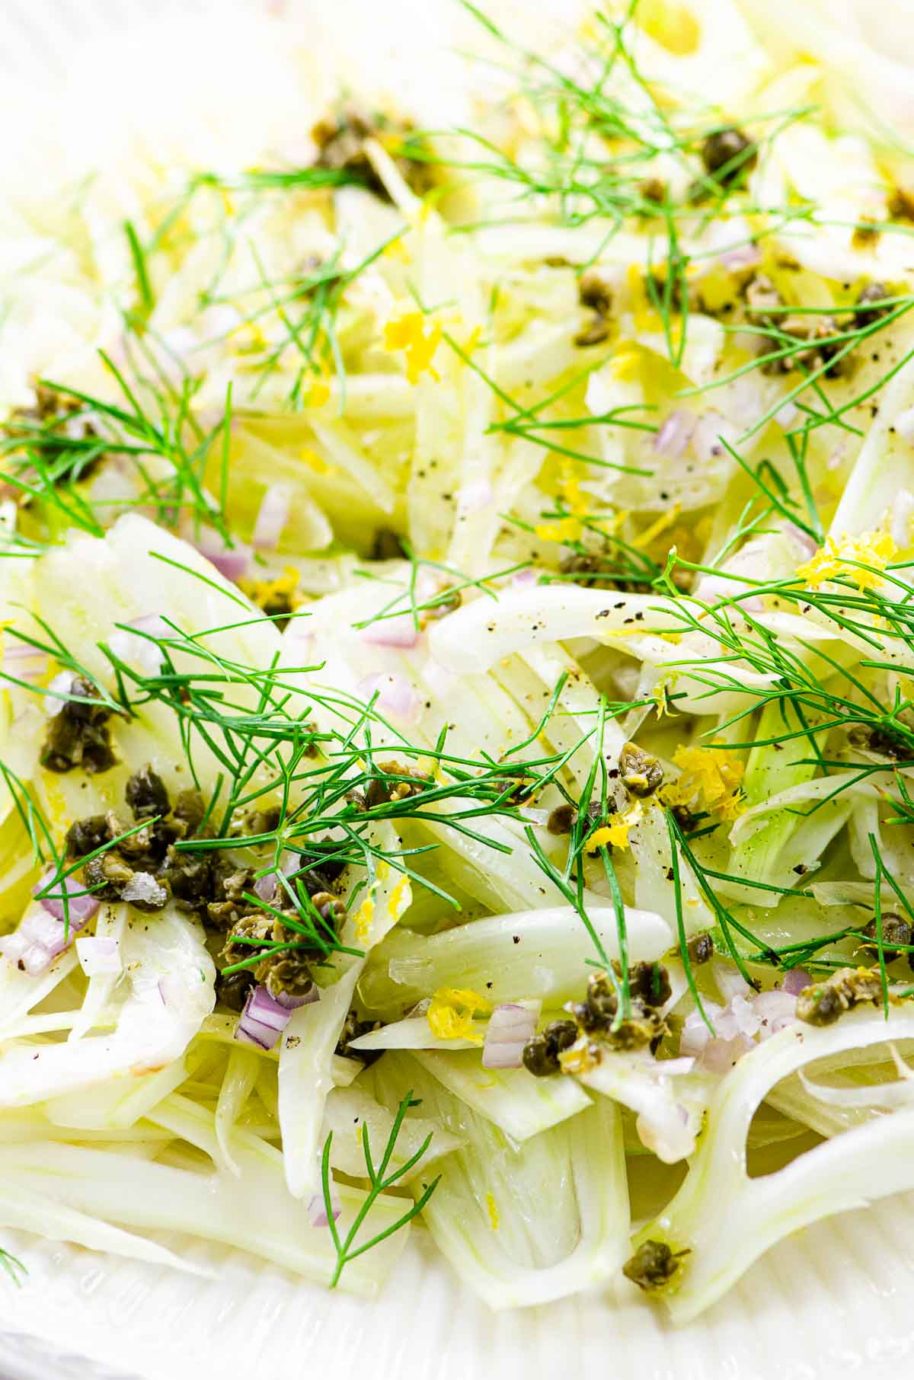 shaved fennel, capers, shallots, lemon zest, and fennel fronds